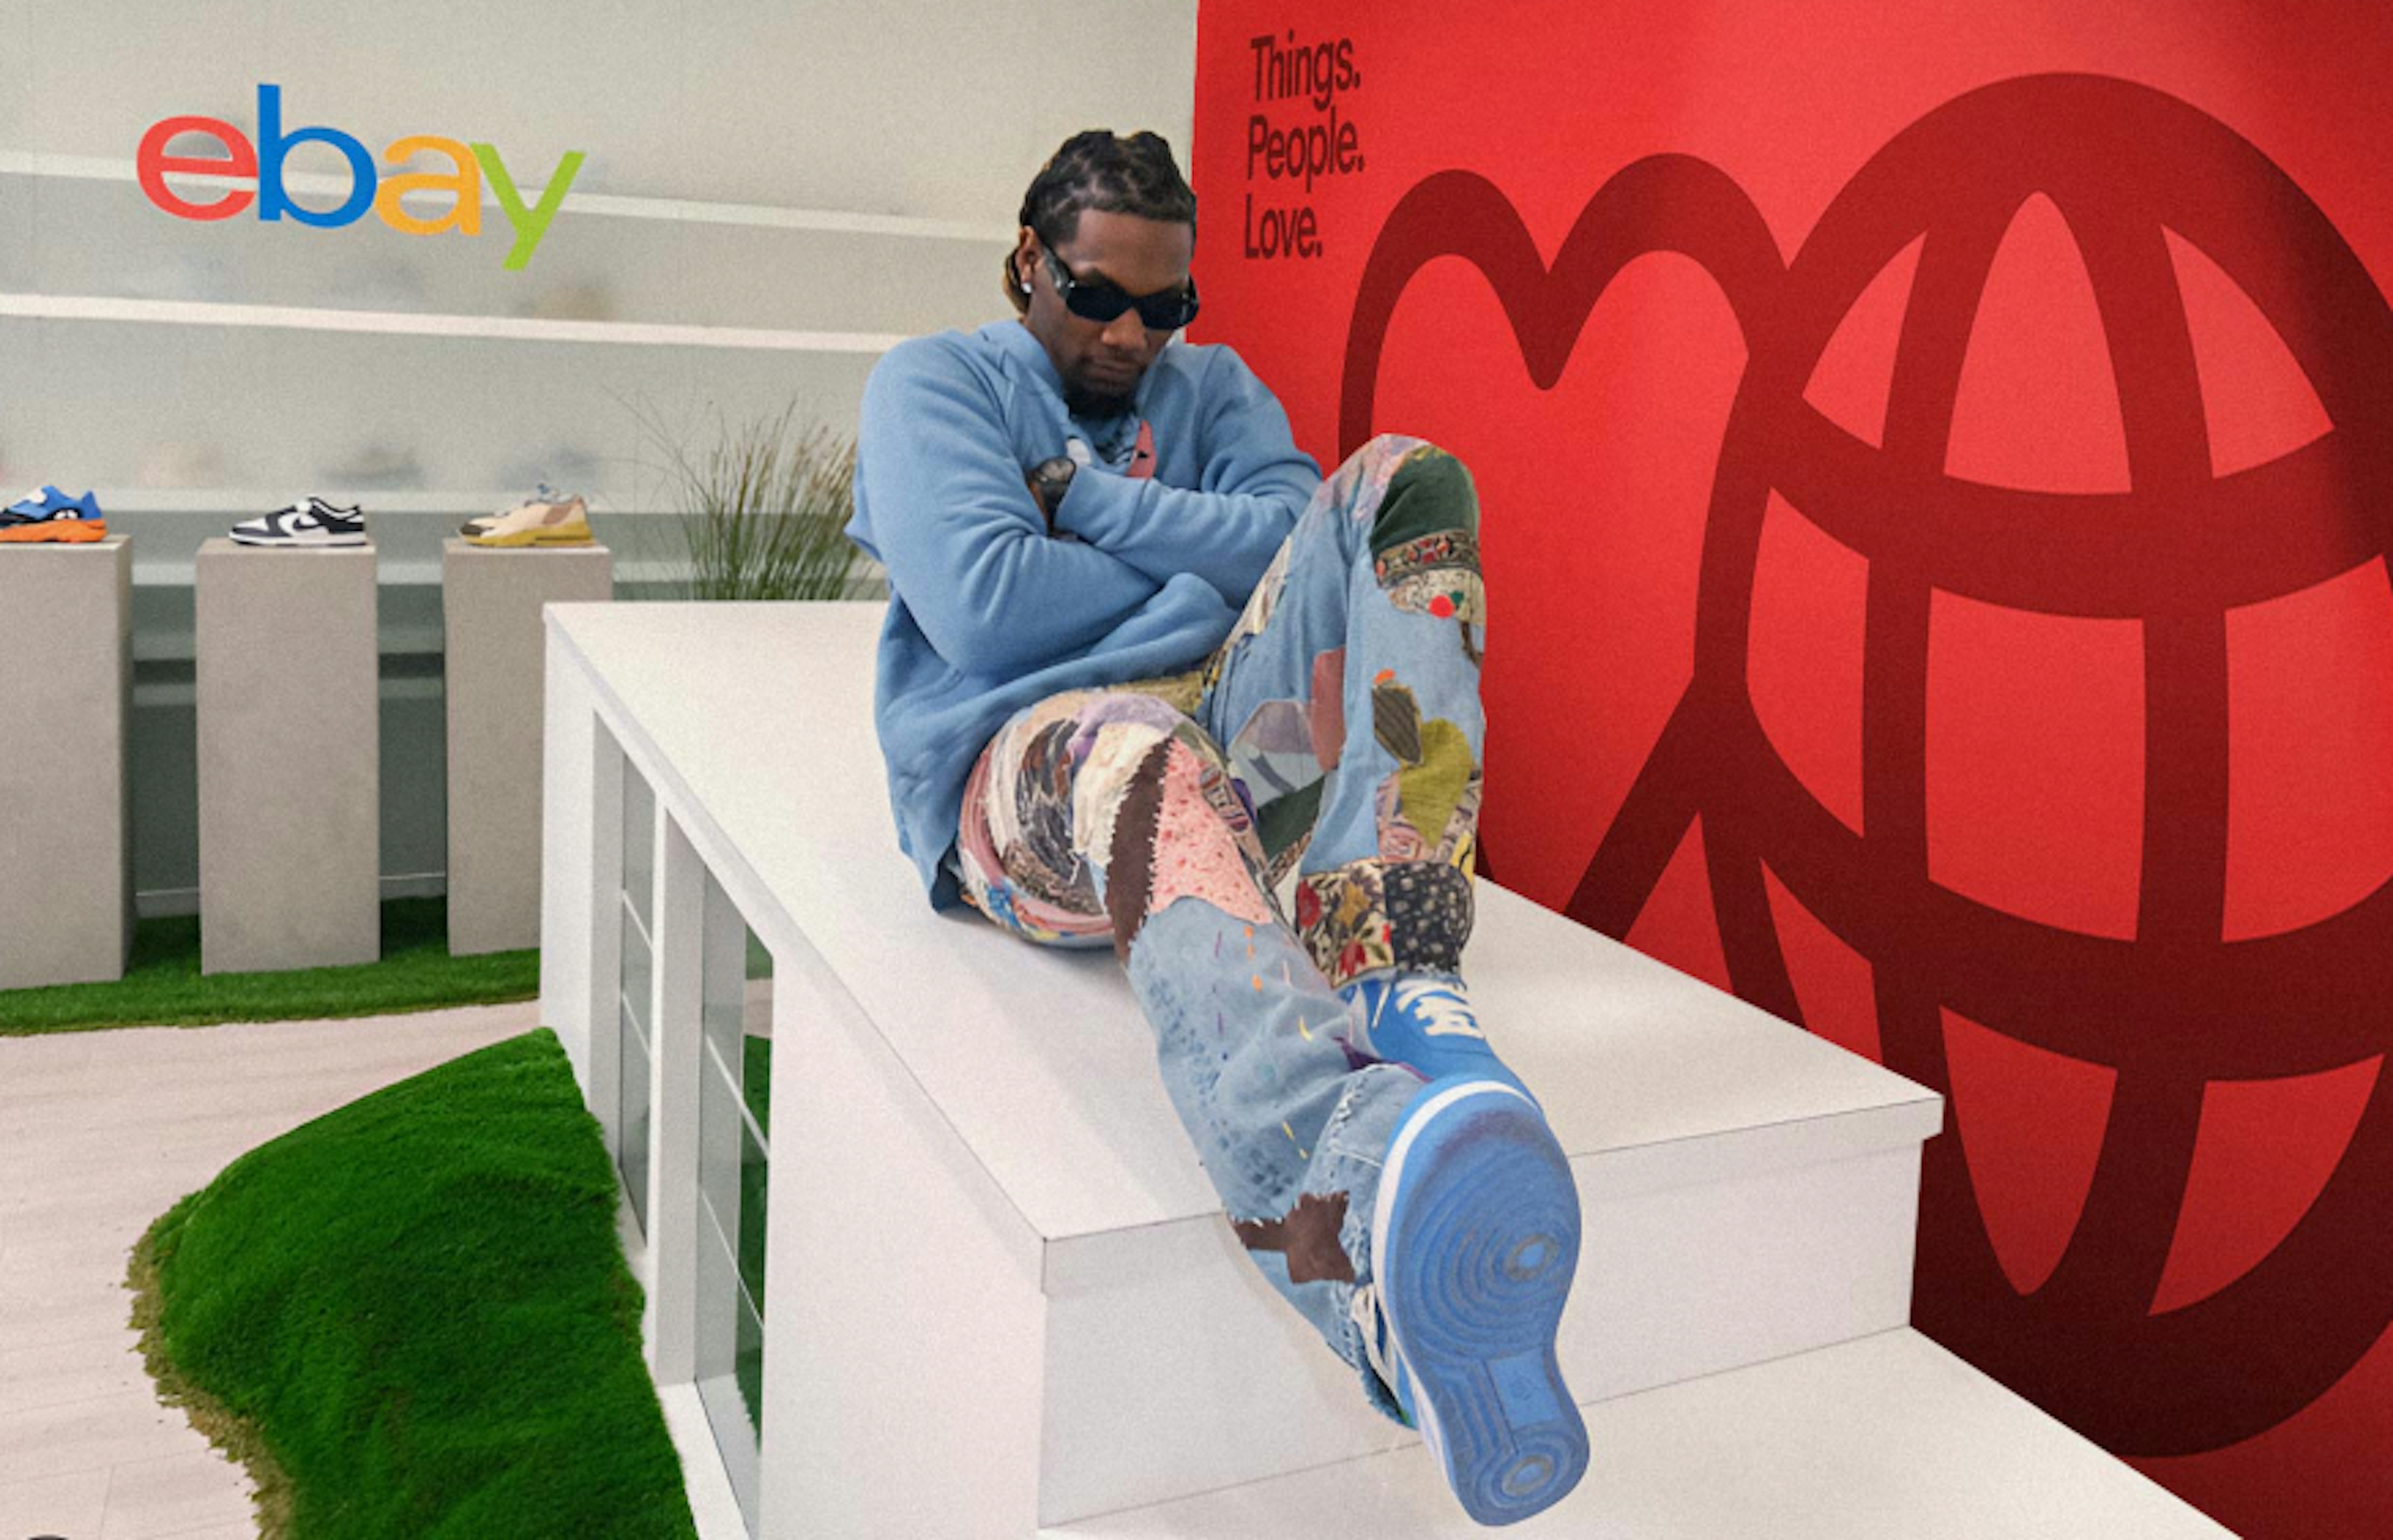 A cool looking guy in fashionable streetwear and sunglasses sitting on a white table in front of a bright red wall with the text “Things.People.Love” and a large heart and globe icon.